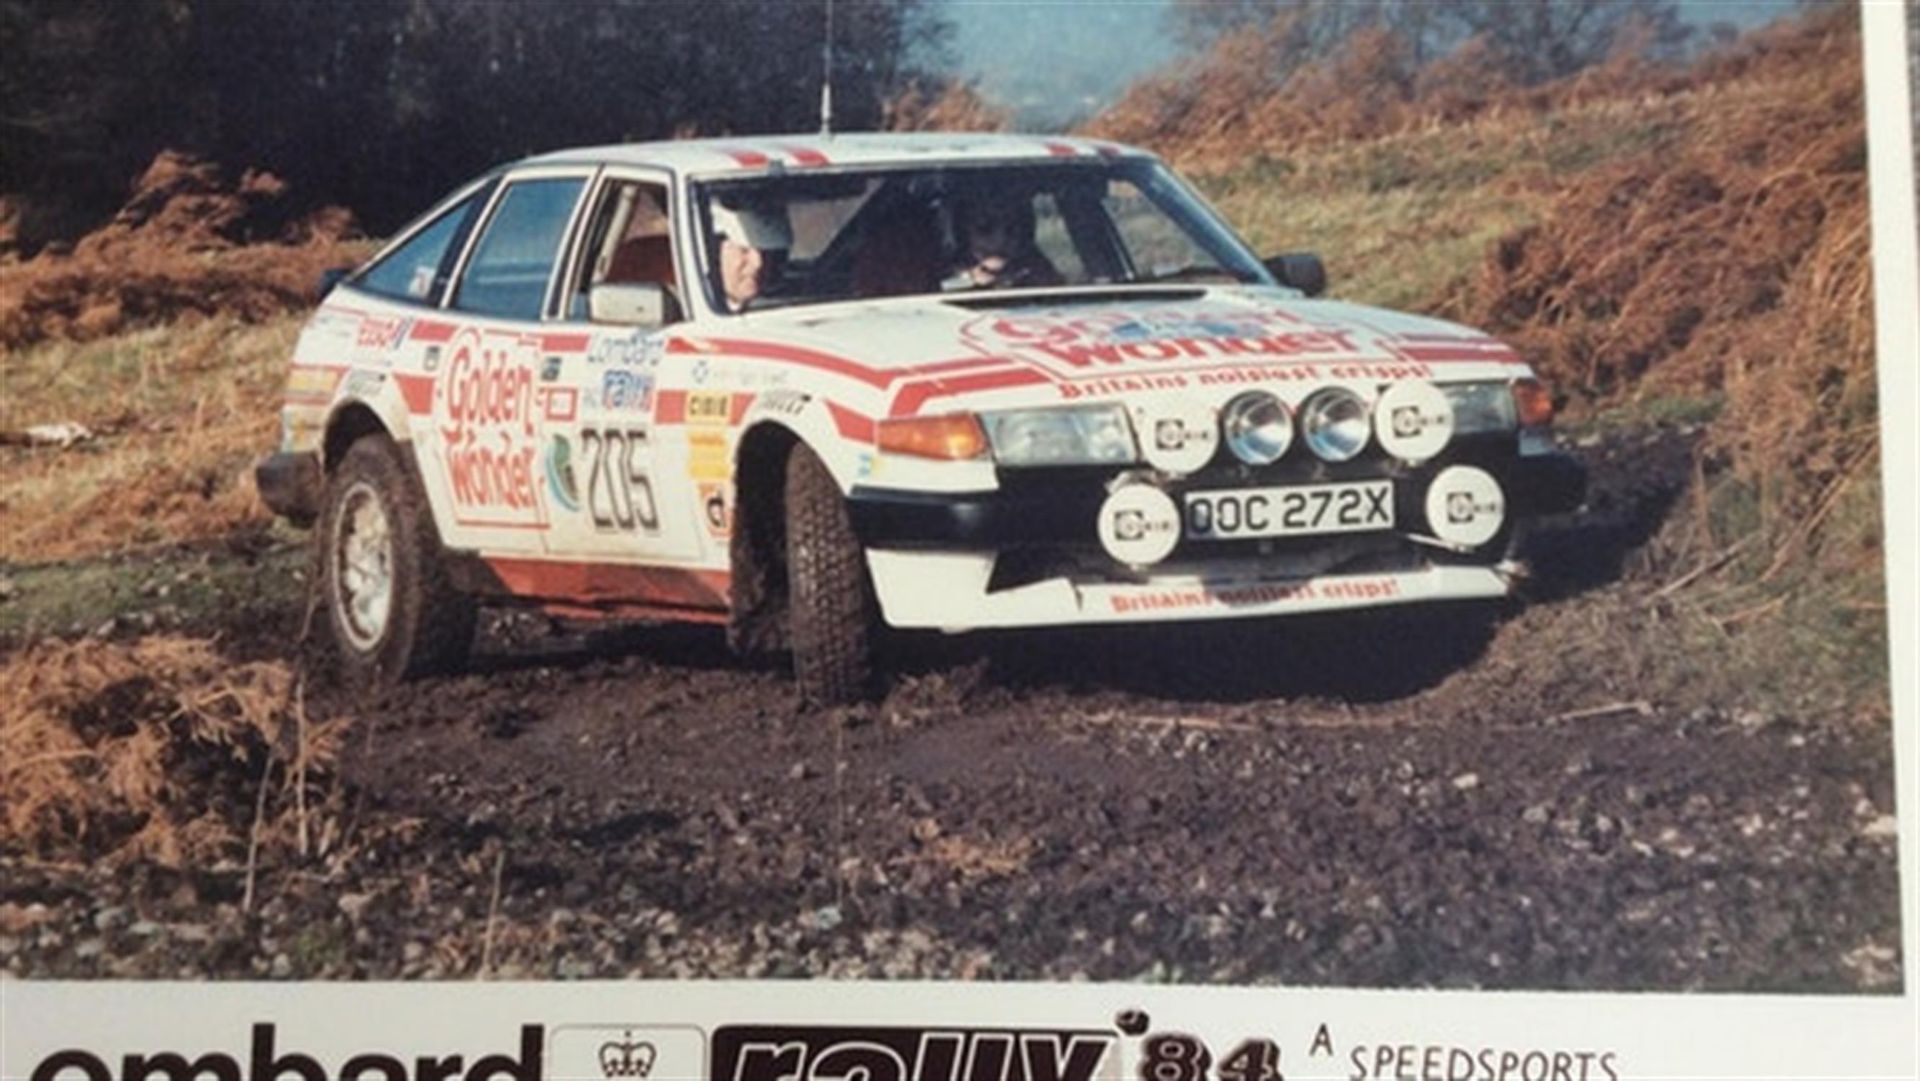 1982 Rover SD1 Vitesse 'Group A' Works Rally Car - Image 8 of 10